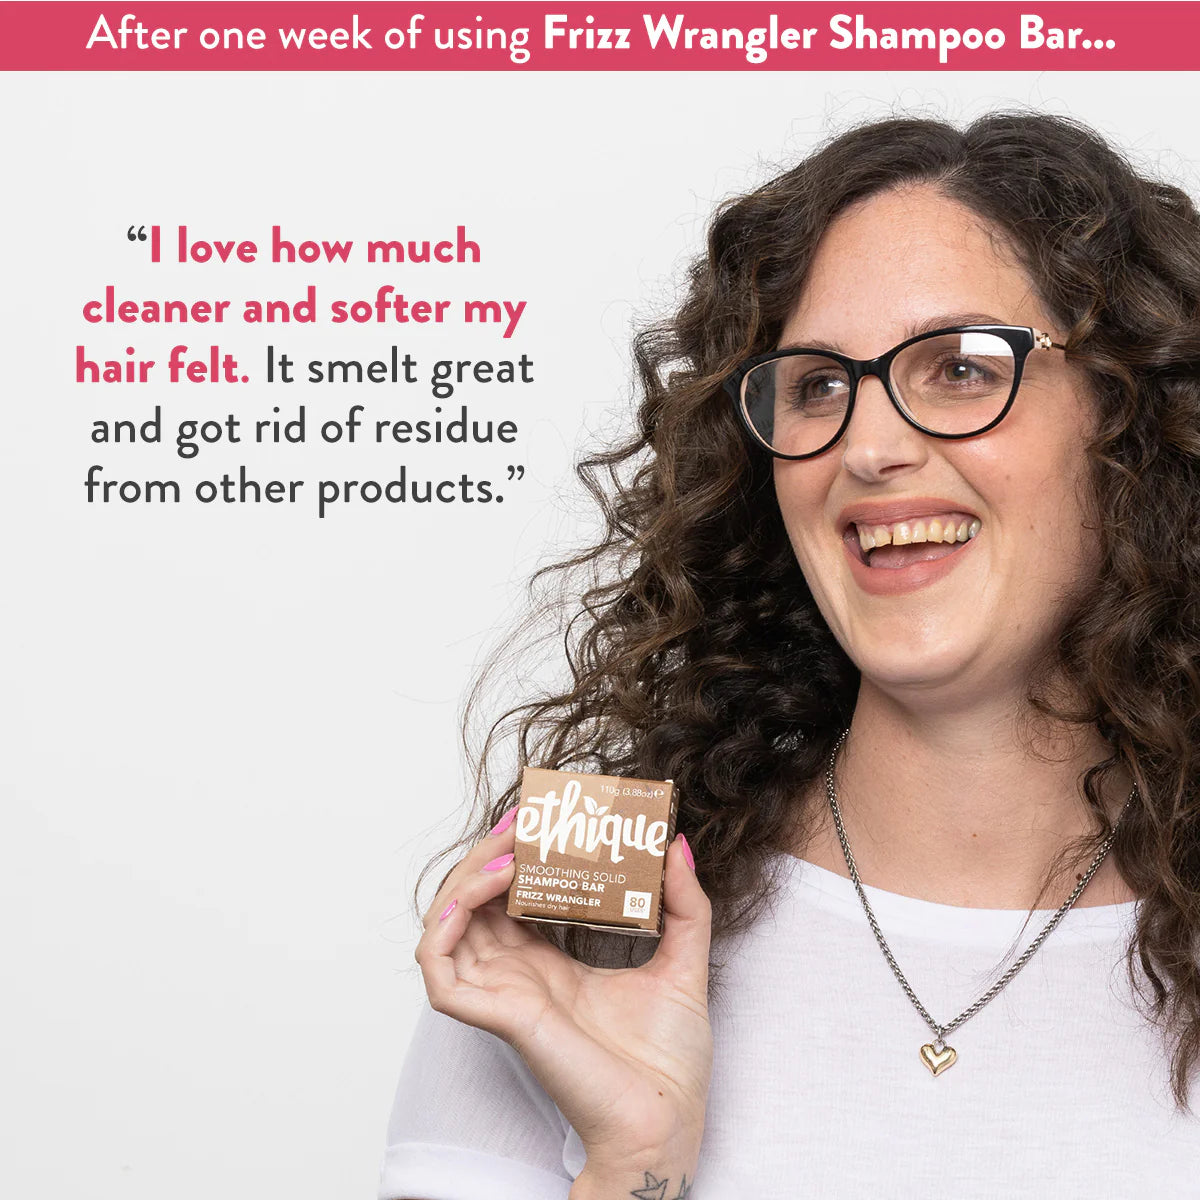 Ethique Smoothing Shampoo Bar for Frizzy Hair: Frizz Wrangler-The Living Co.